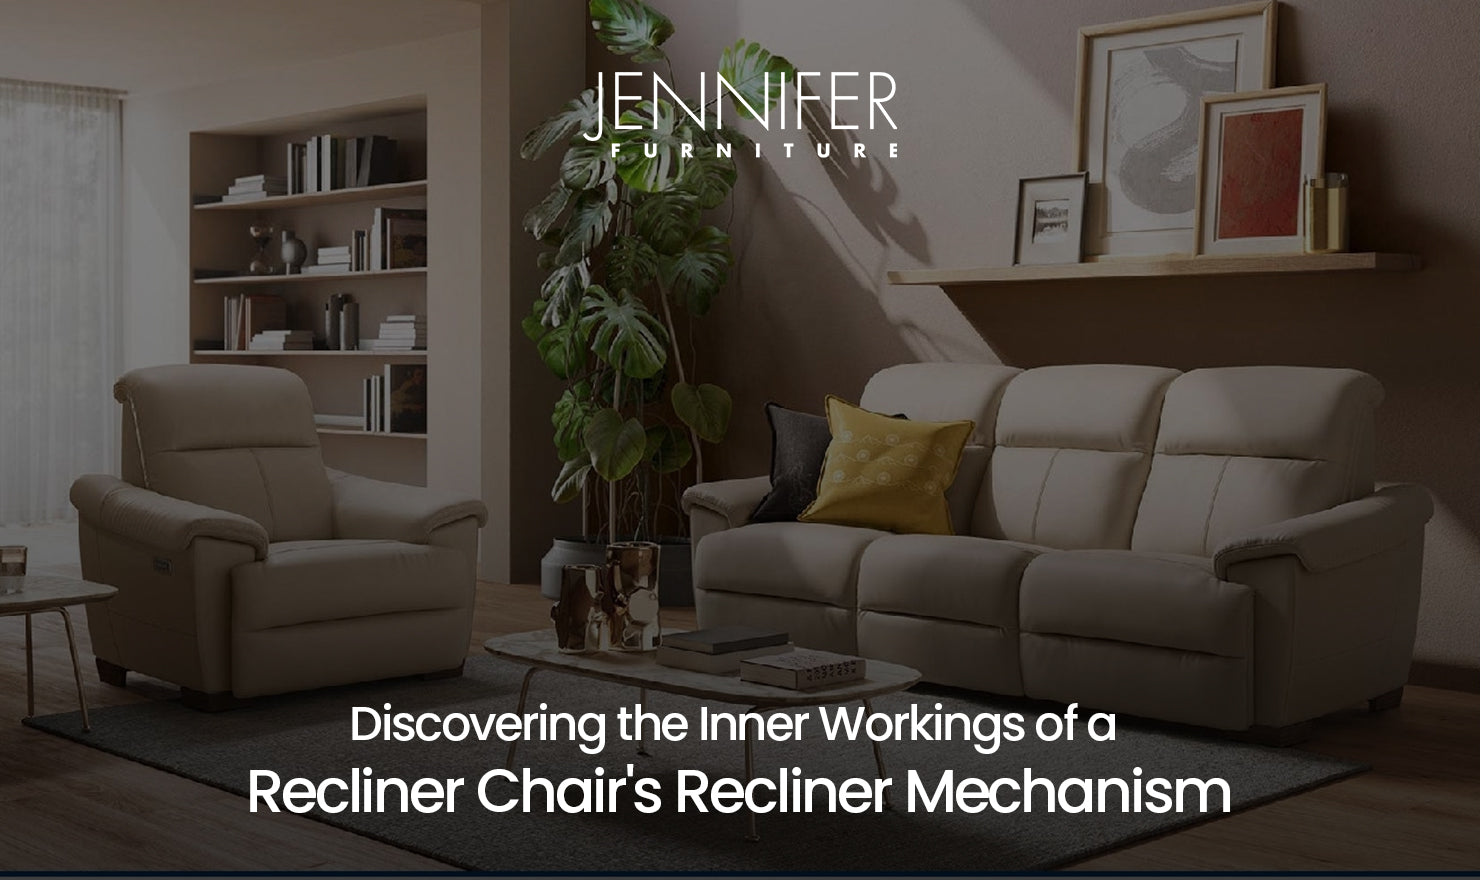 Workings of a Recliner Chairs Mechanism